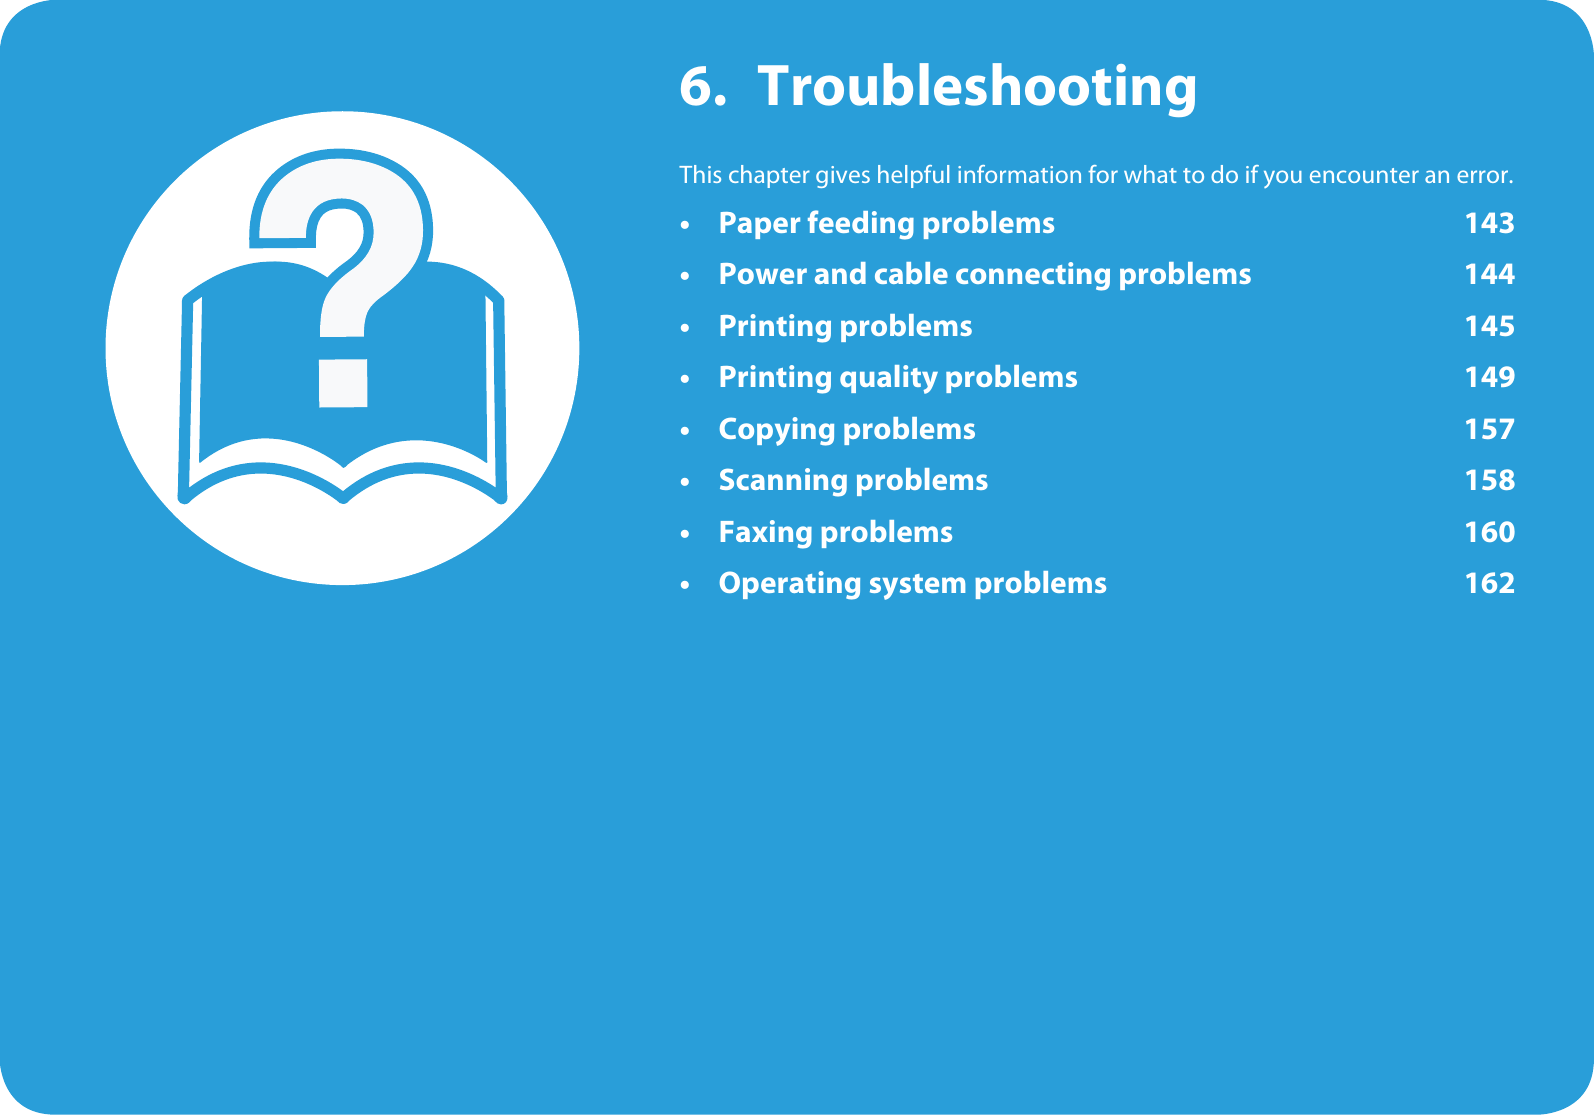 6. TroubleshootingThis chapter gives helpful information for what to do if you encounter an error.• Paper feeding problems 143• Power and cable connecting problems 144• Printing problems 145• Printing quality problems 149• Copying problems 157• Scanning problems 158• Faxing problems 160• Operating system problems 162